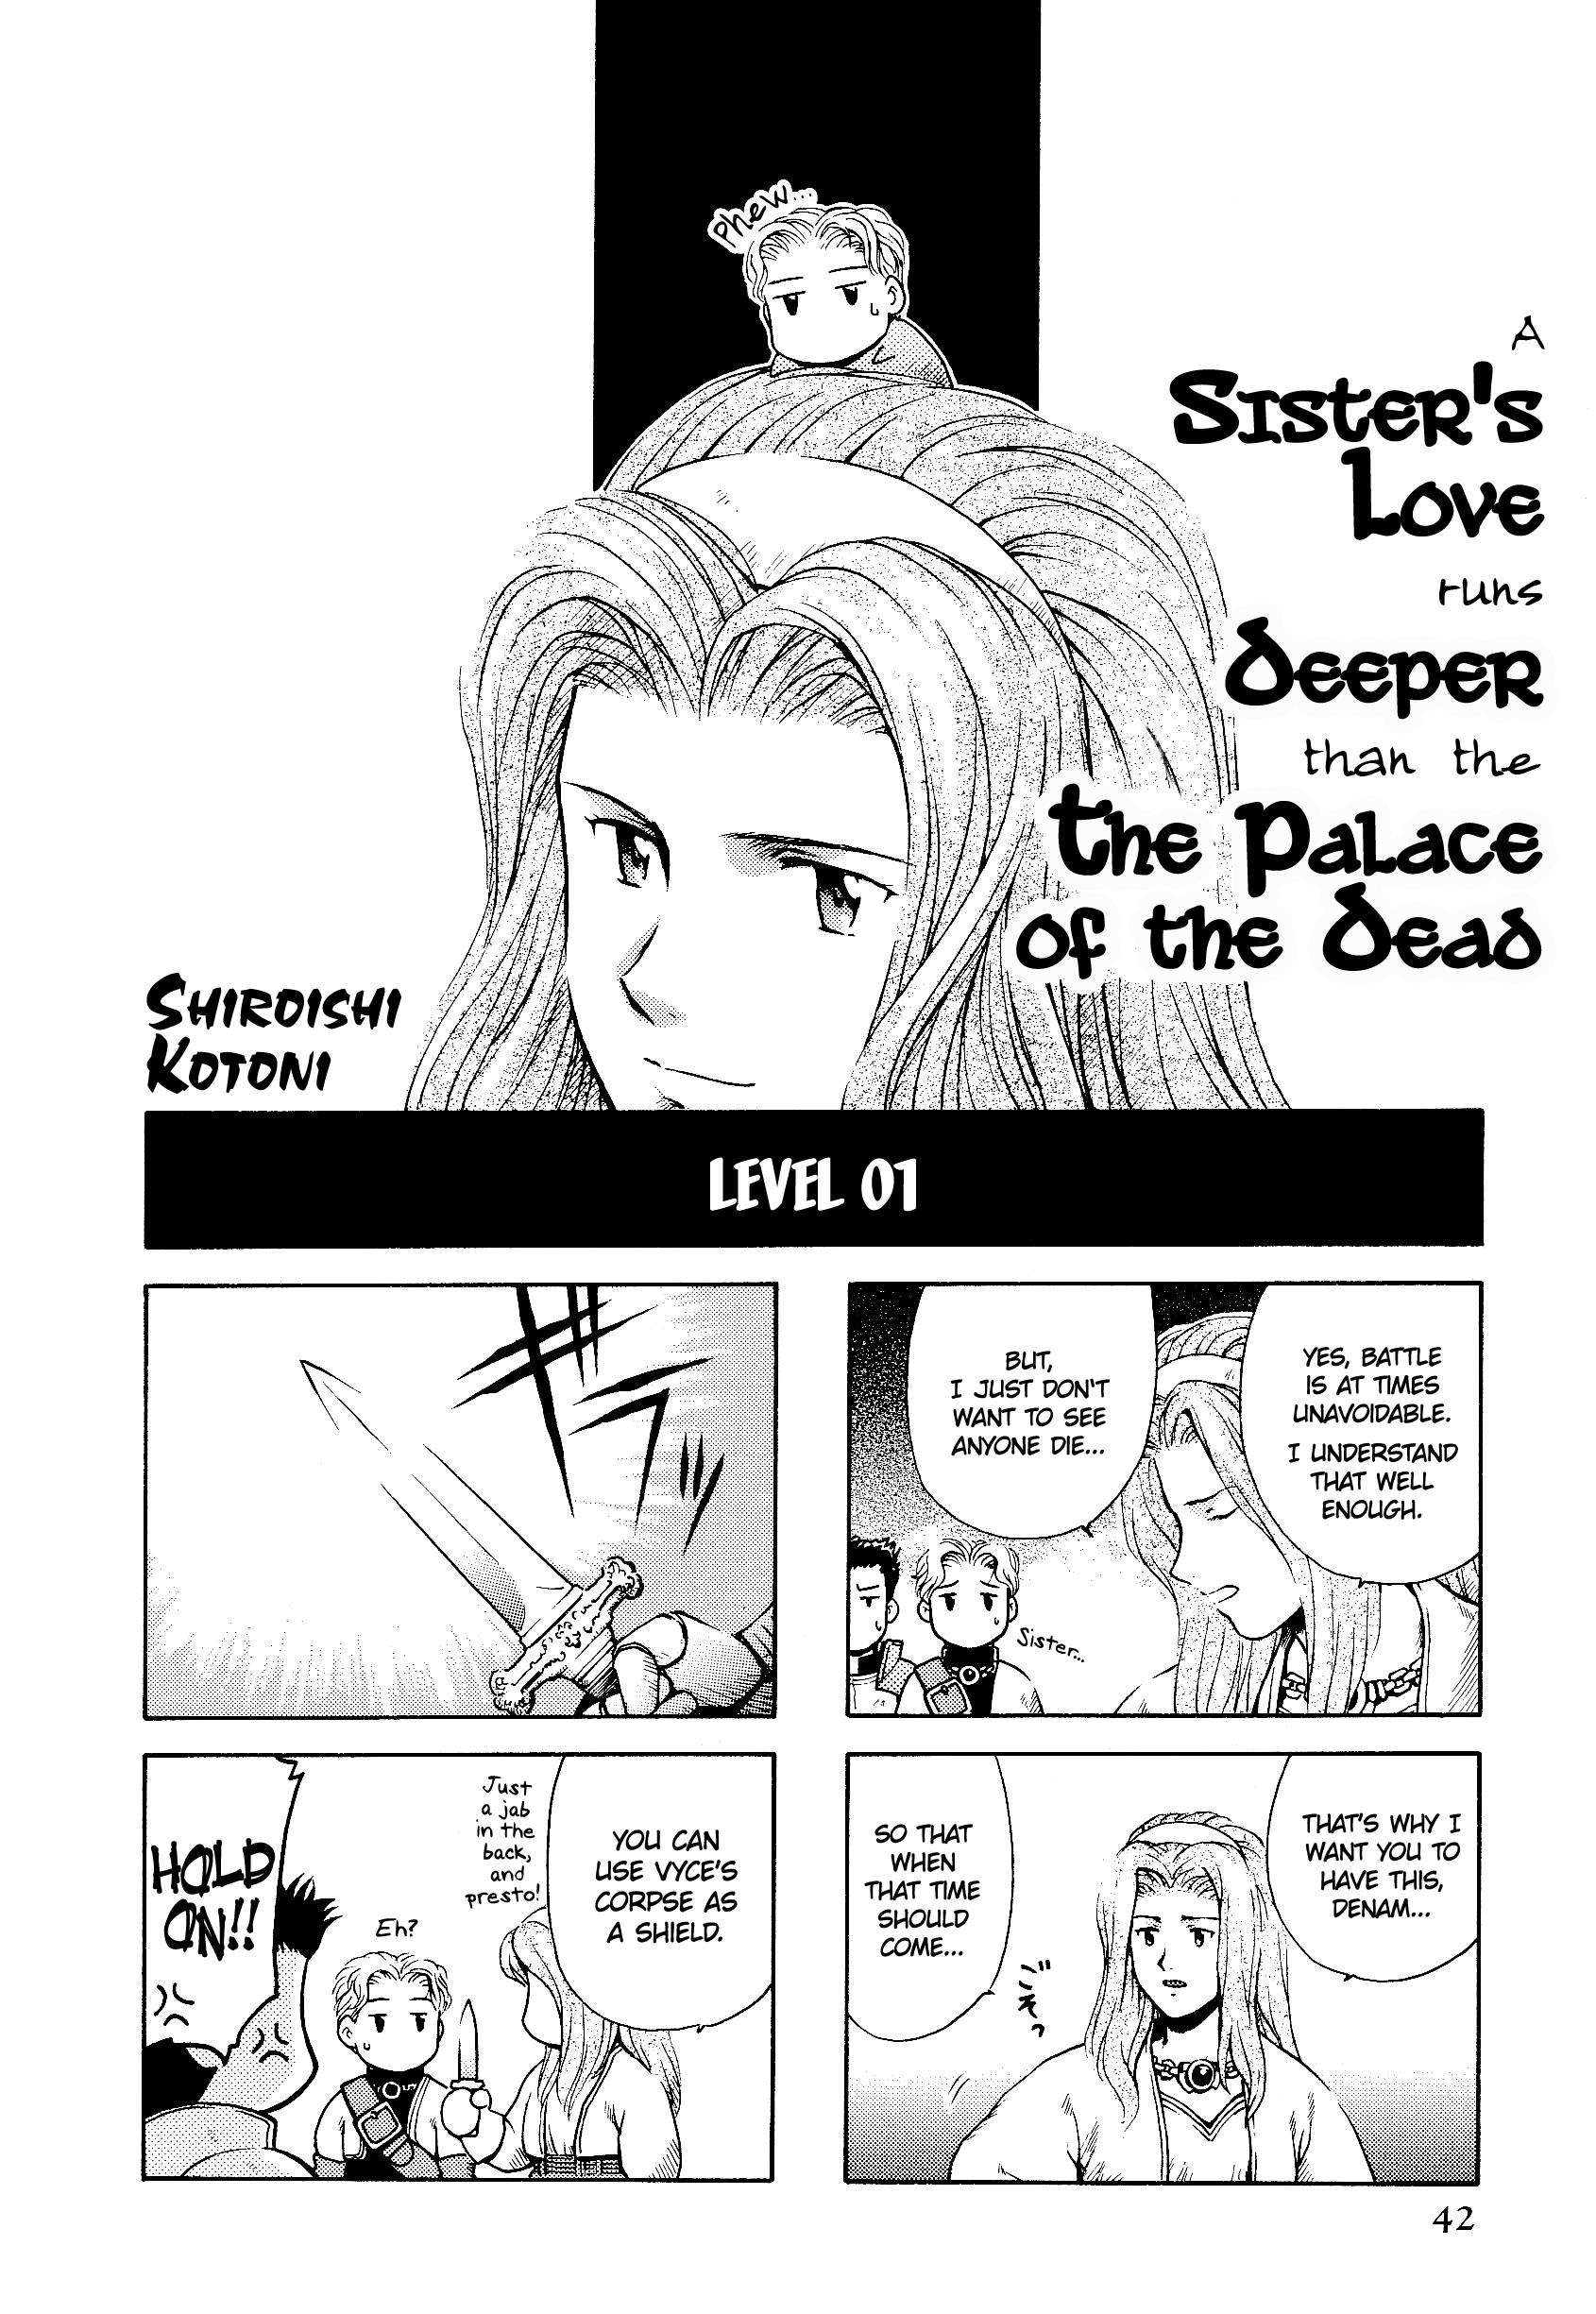 Tactics Ogre: Let Us Cling Together 4-Koma Kings Vol.1 Chapter 6: A Sister's Love Runs Deeper Than The Palace Of The Dead - Picture 1